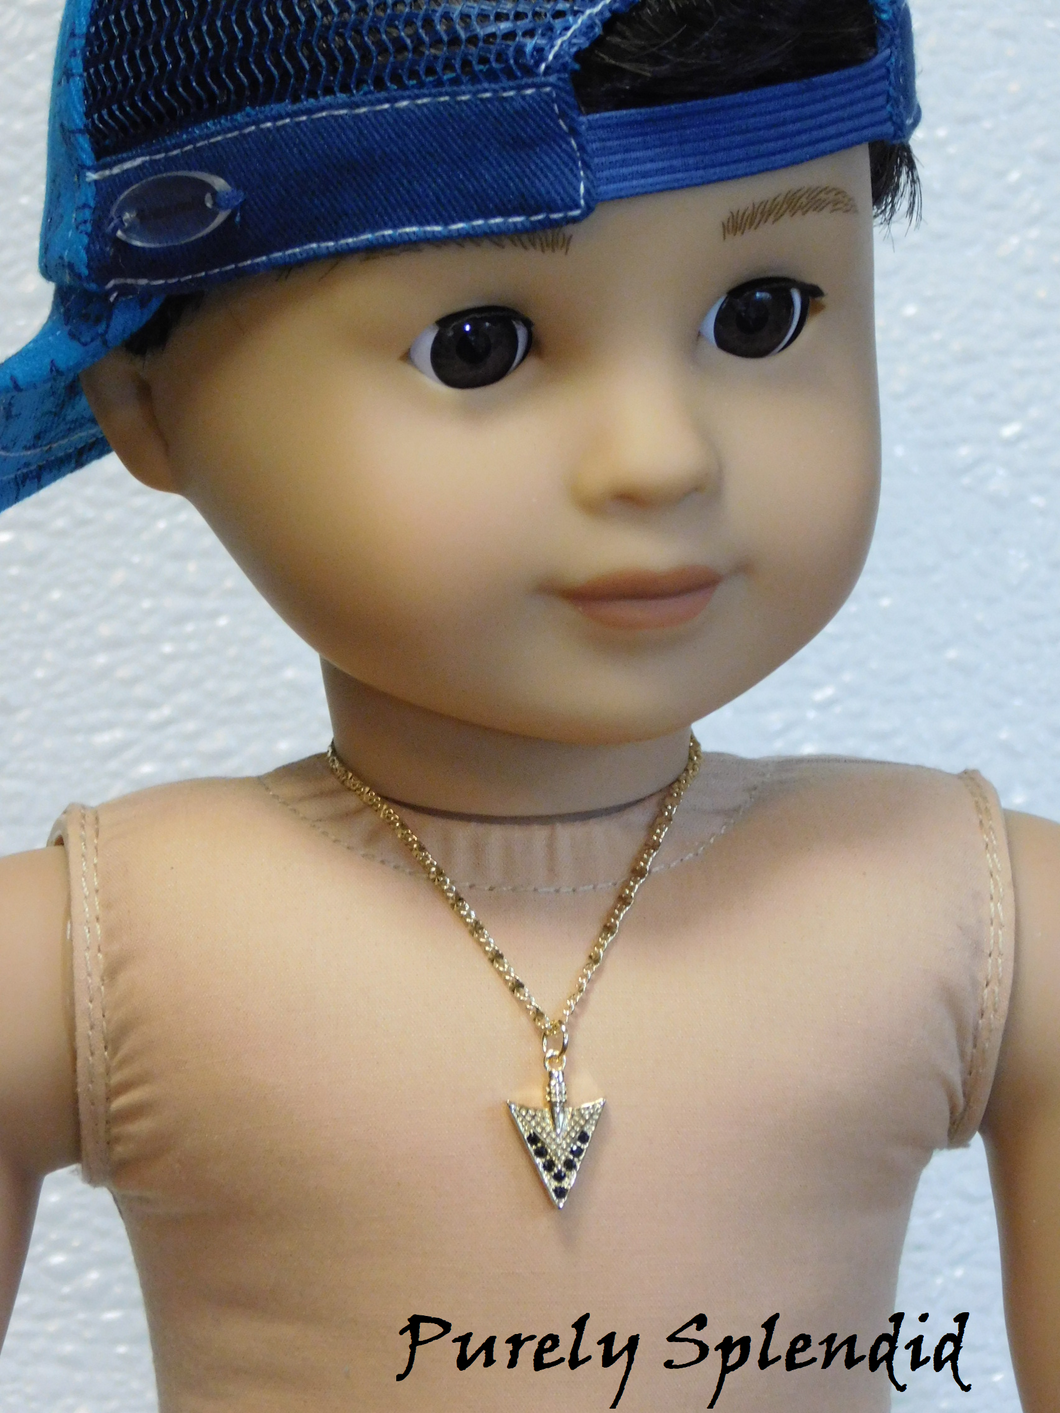 18 inch doll shown wearing a decorative gold Arrowhead Necklace with fancy gold chain